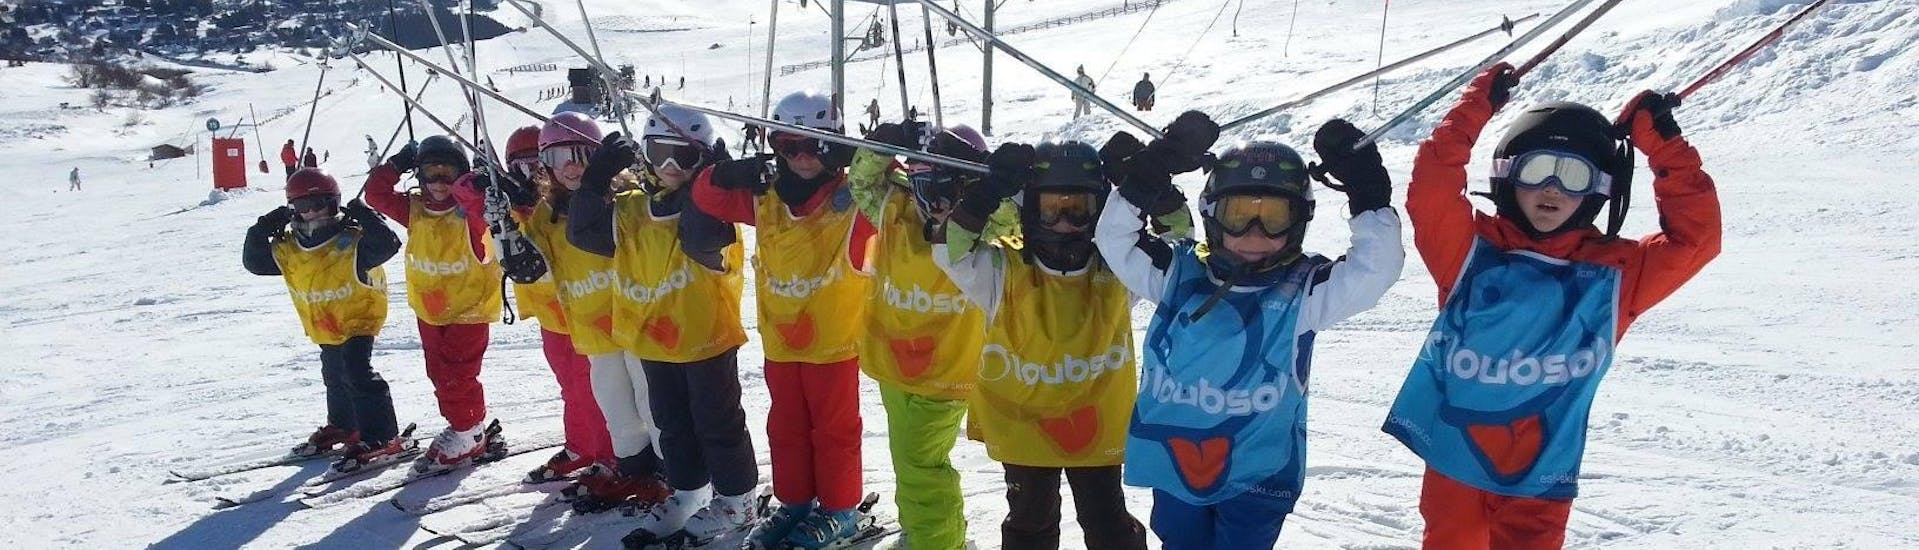 Kids are standing next to each other with their ski poles up in the air during their Kids Ski Lessons (5-12 years) - March 1-6 - All Levels with the ski school ESI Gliss'Émotion Super-Besse.